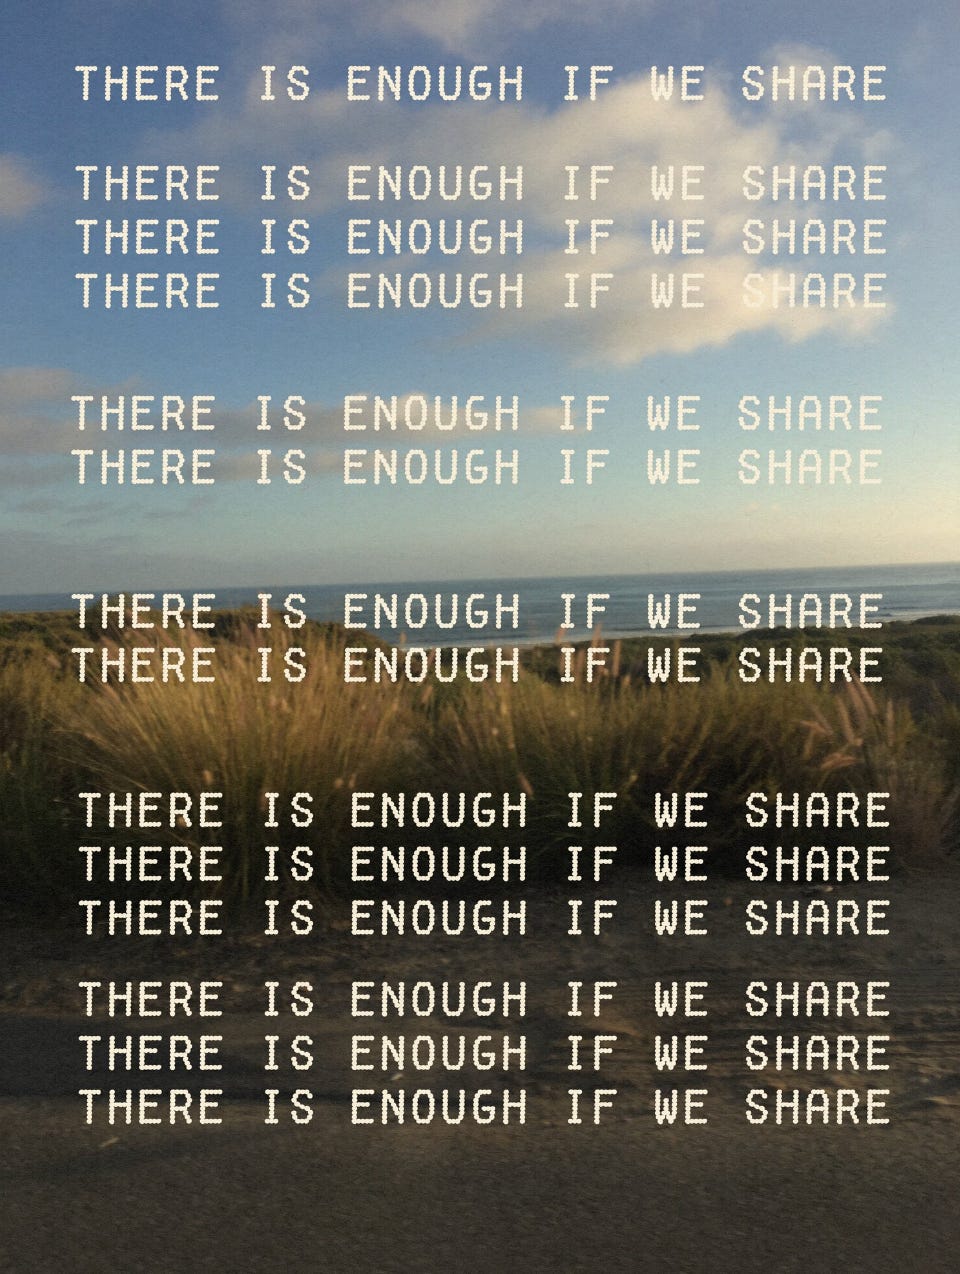 art print that says, "there is enough if we share"